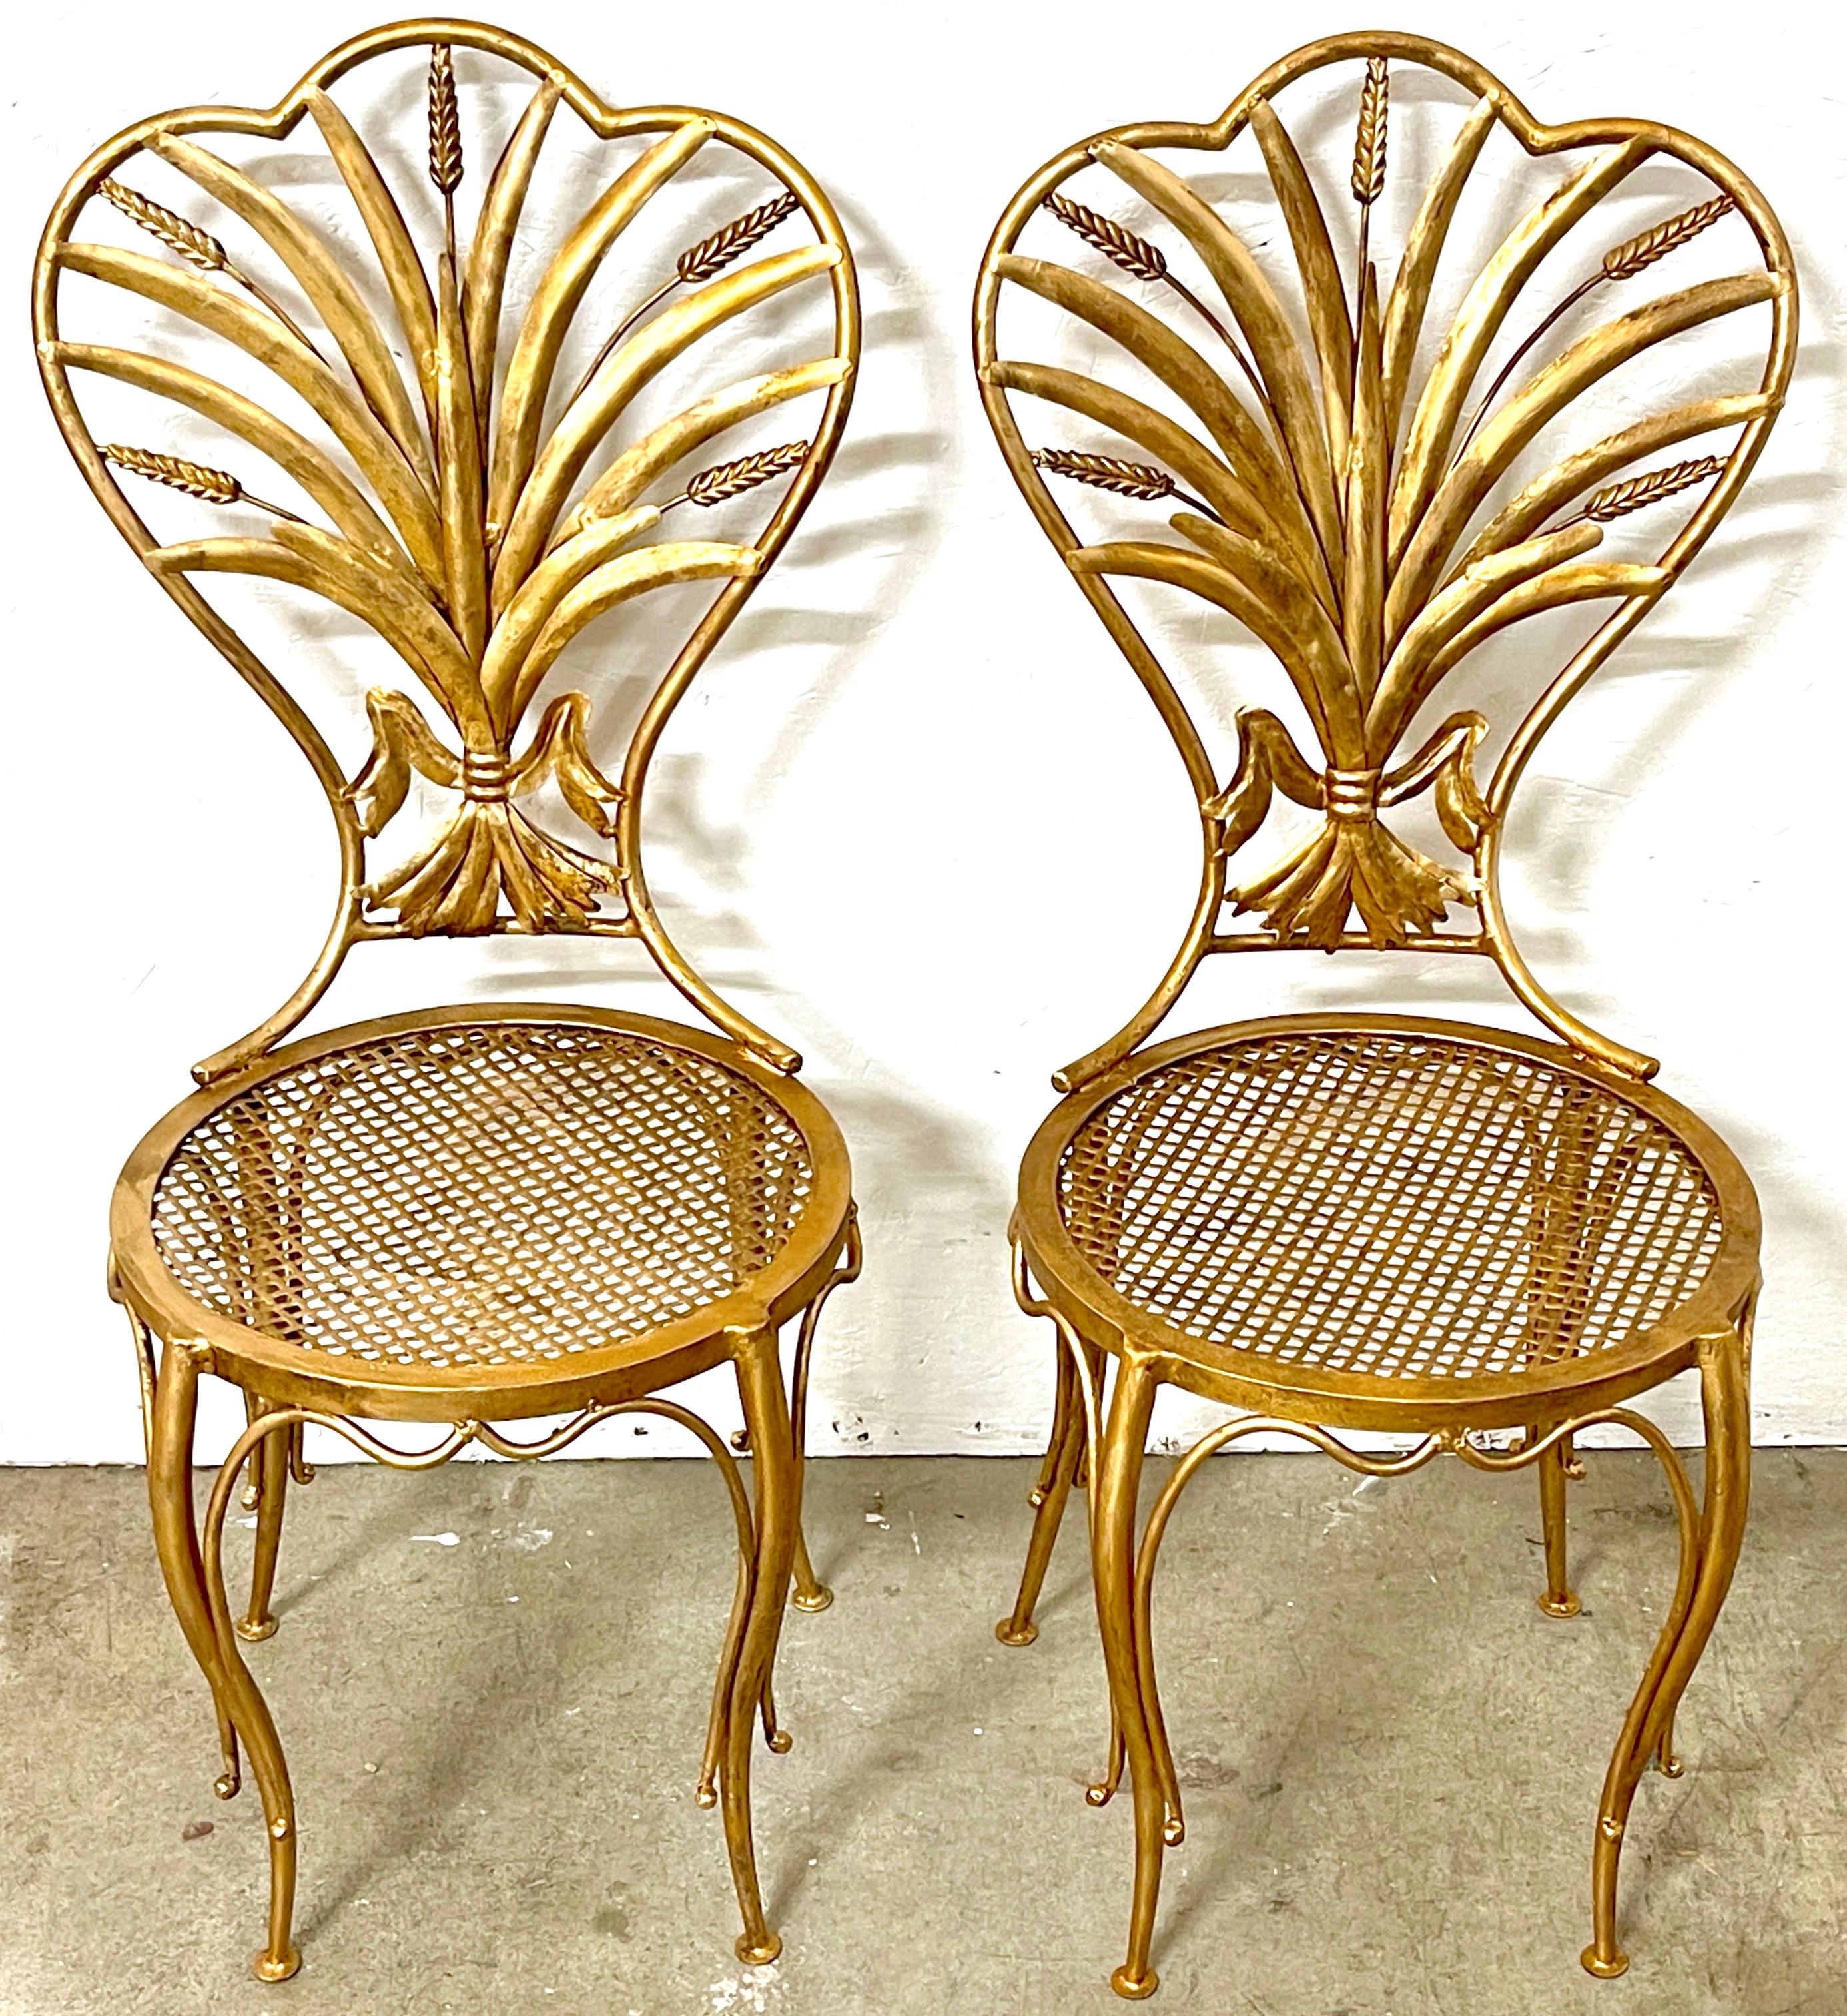 Pair of Italian Hollywood Regency  Wheat Sheaf Chairs, by S. Salvadori 
S. Salvadori - Firenze

A stunning pair of Italian Hollywood Regency Wheat Sheaf Chairs, designed by S. Salvadori of Firenze, embodies timeless sophistication. Standing at 36